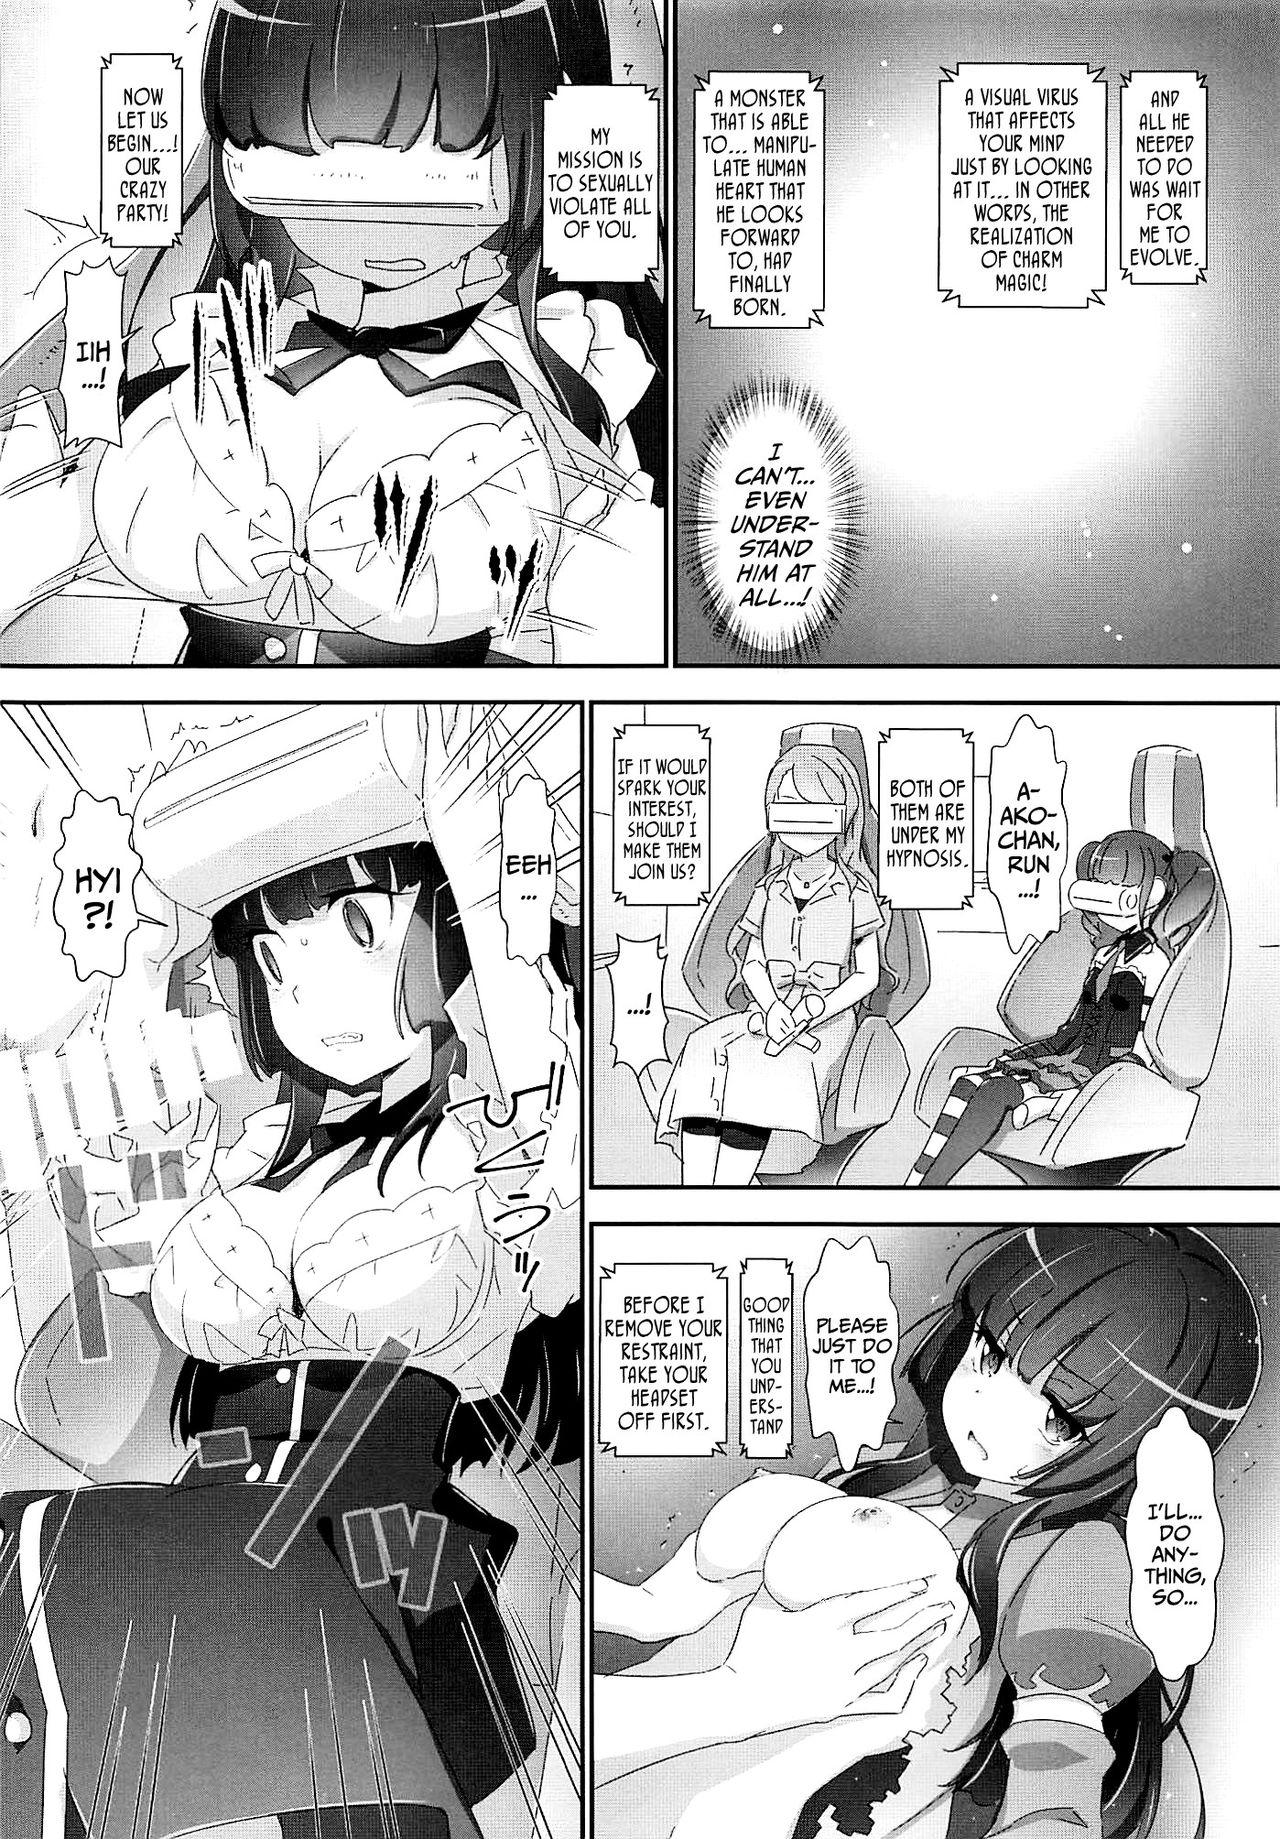 Couples EroYoro? 9 - Bang dream Foursome - Page 9